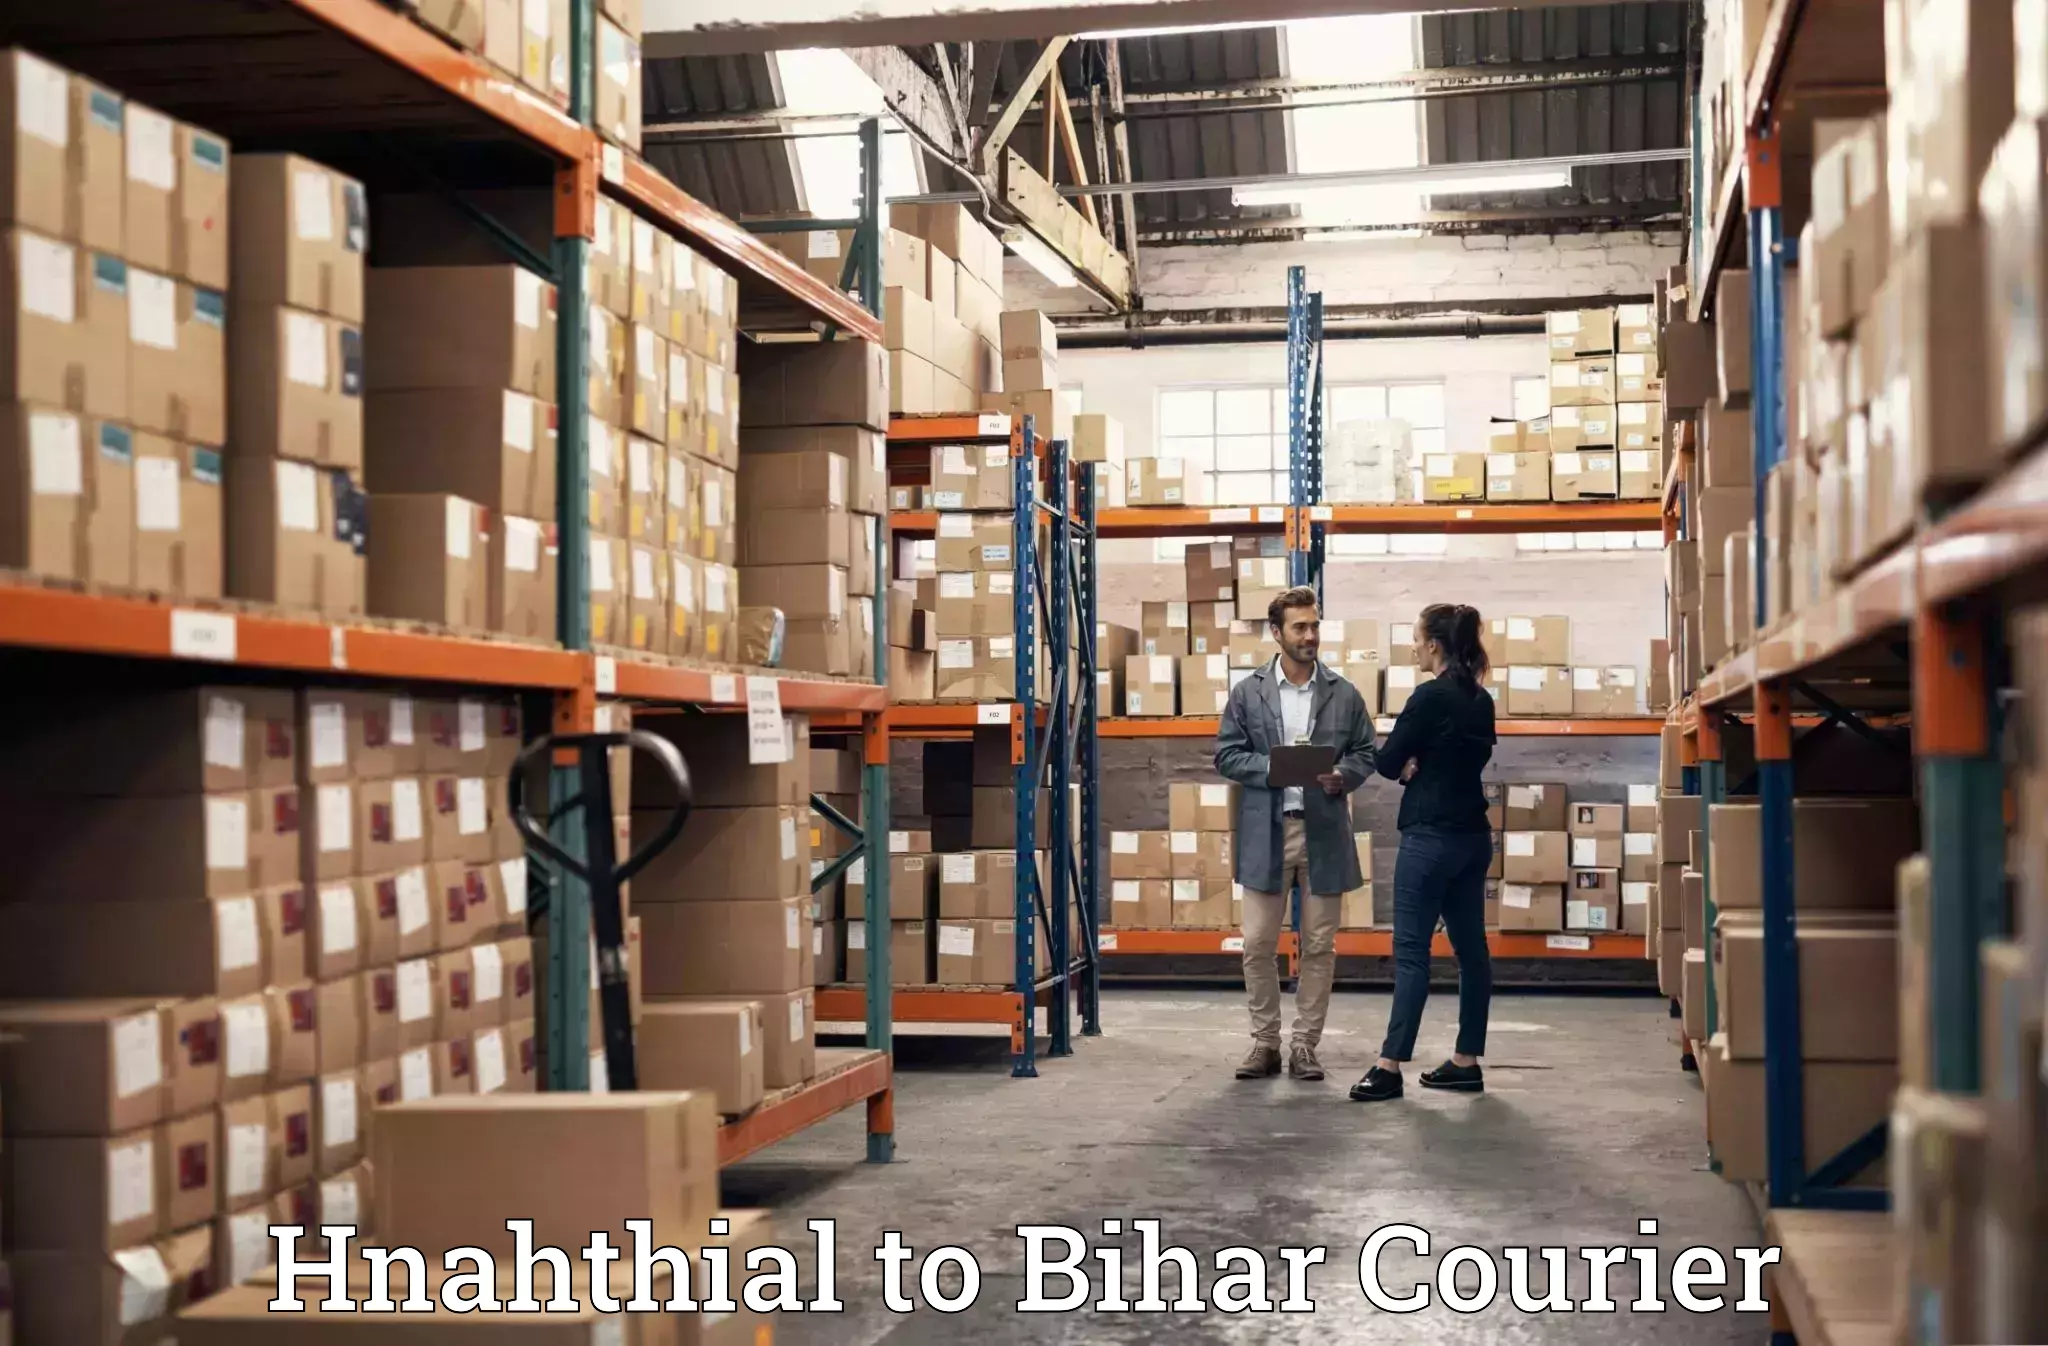 Furniture transport professionals Hnahthial to Bihar